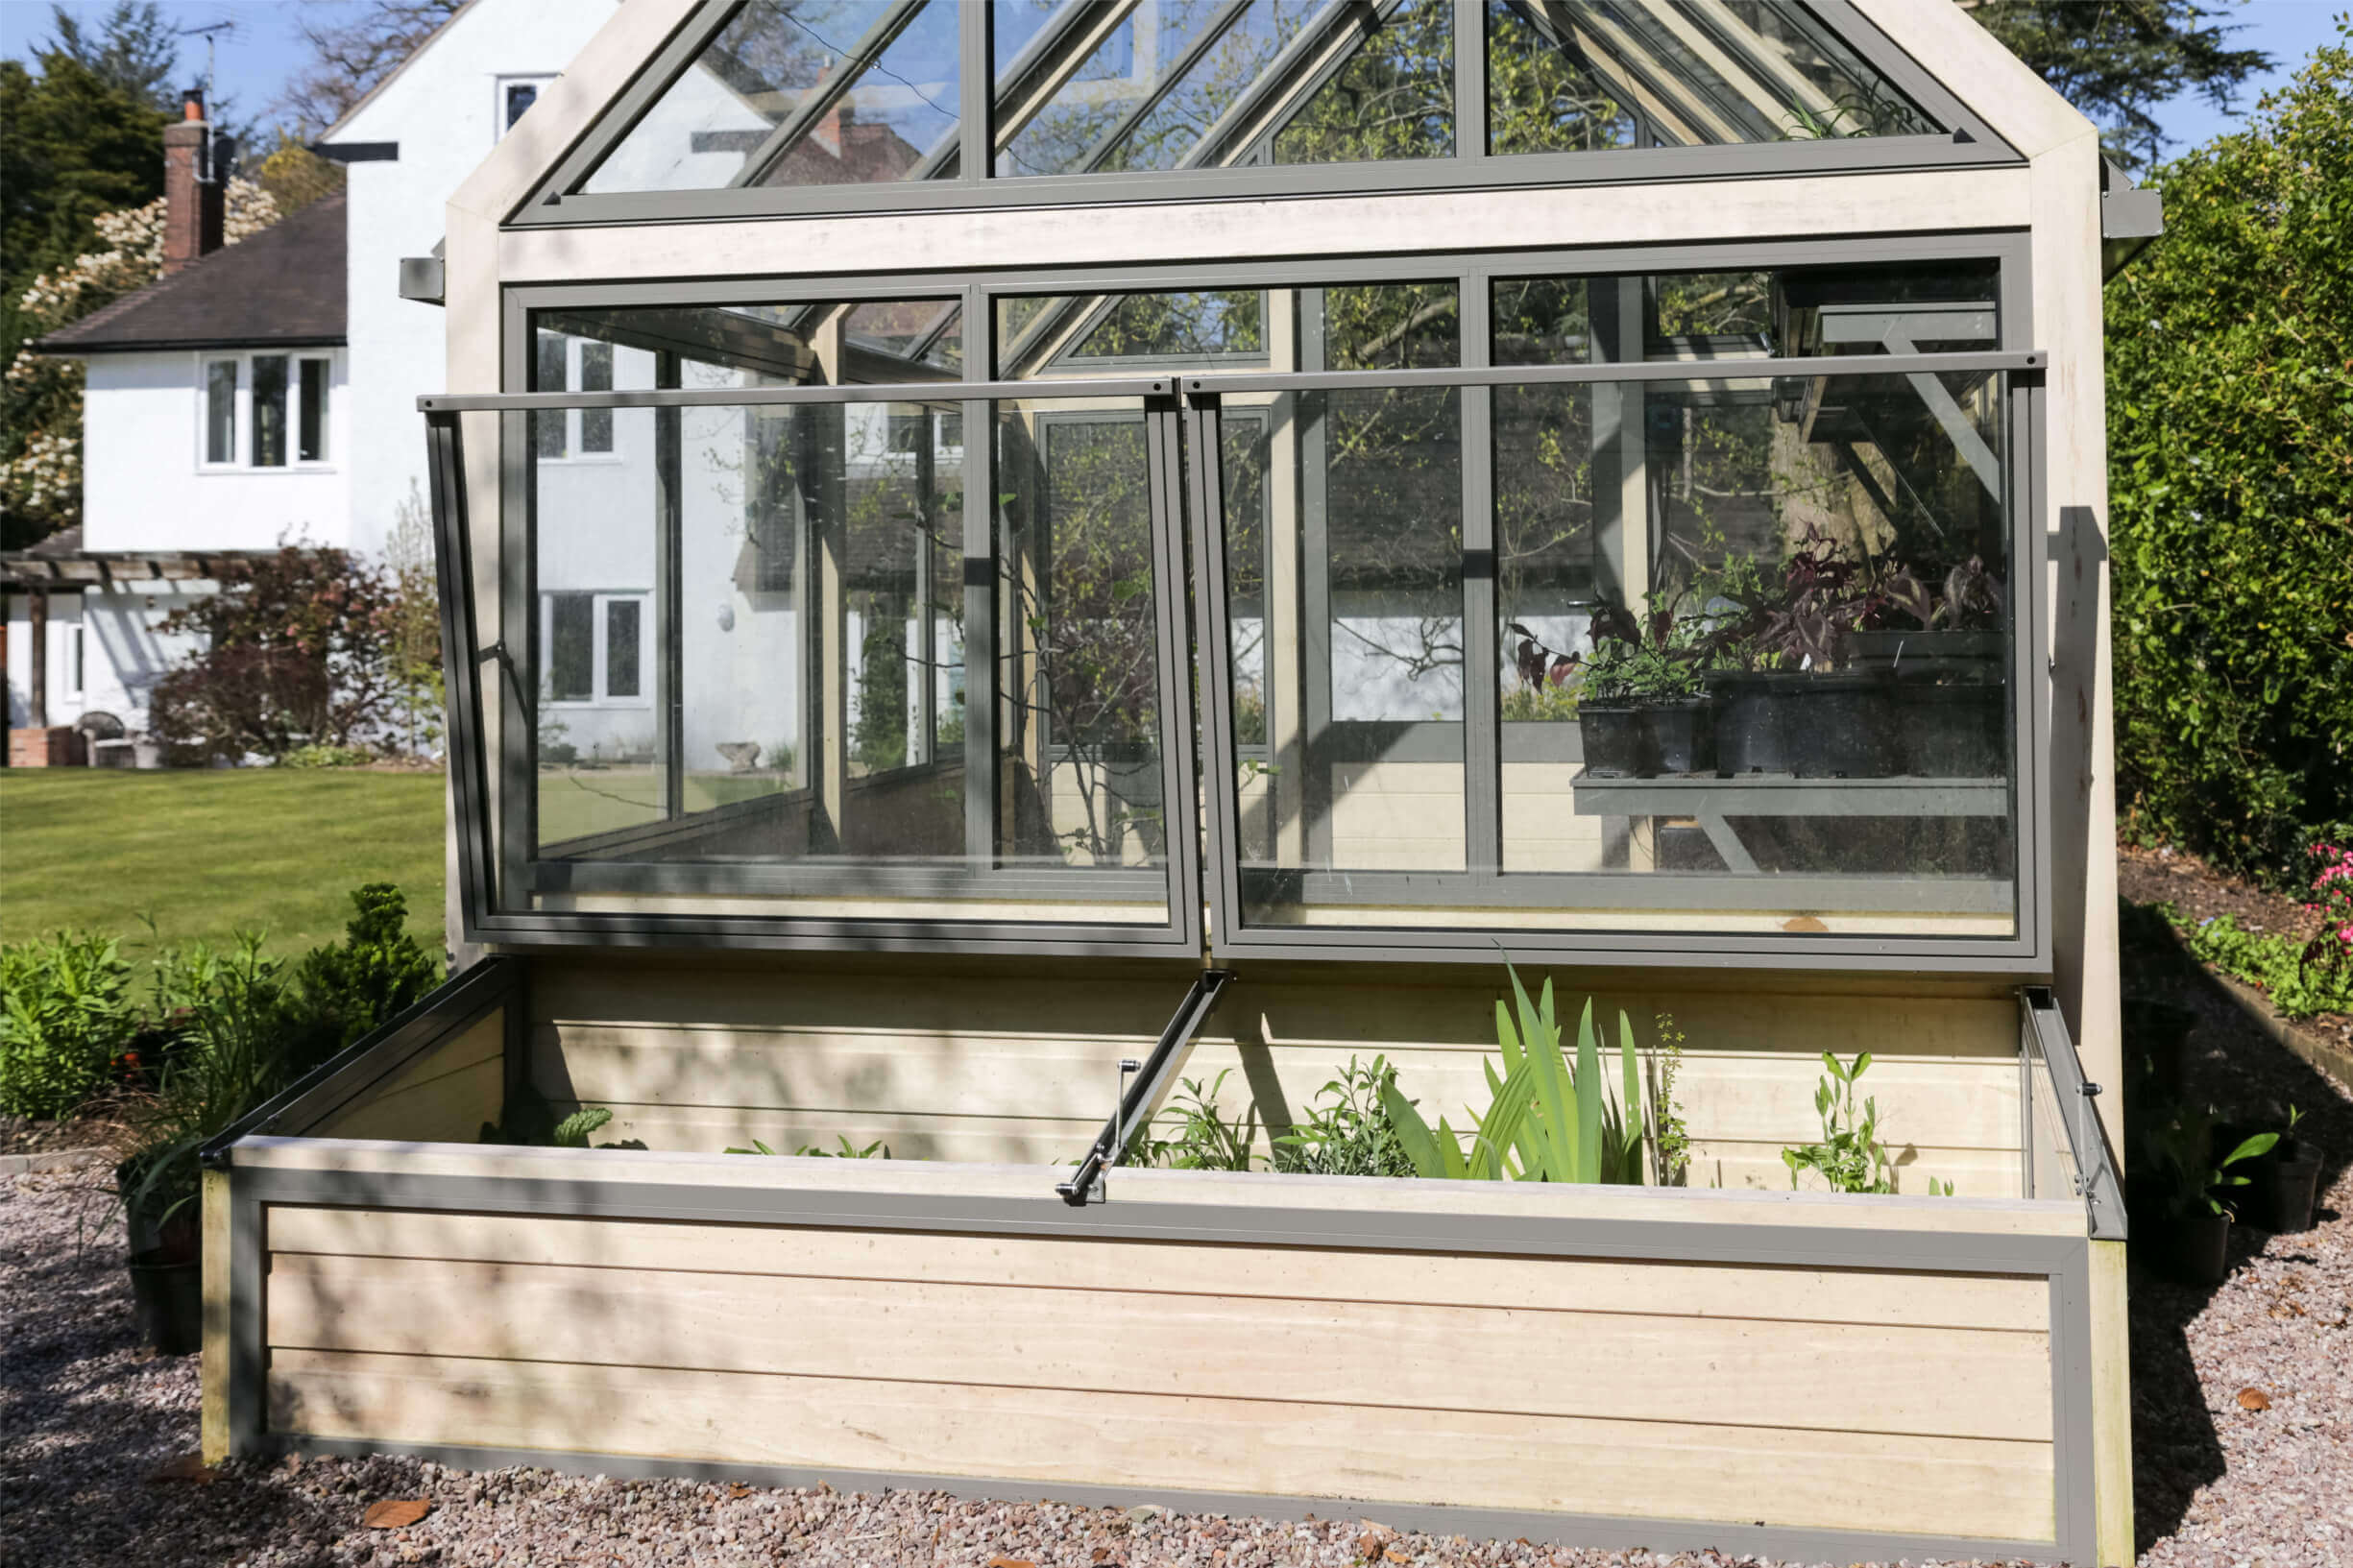 Cold frame greenhouse